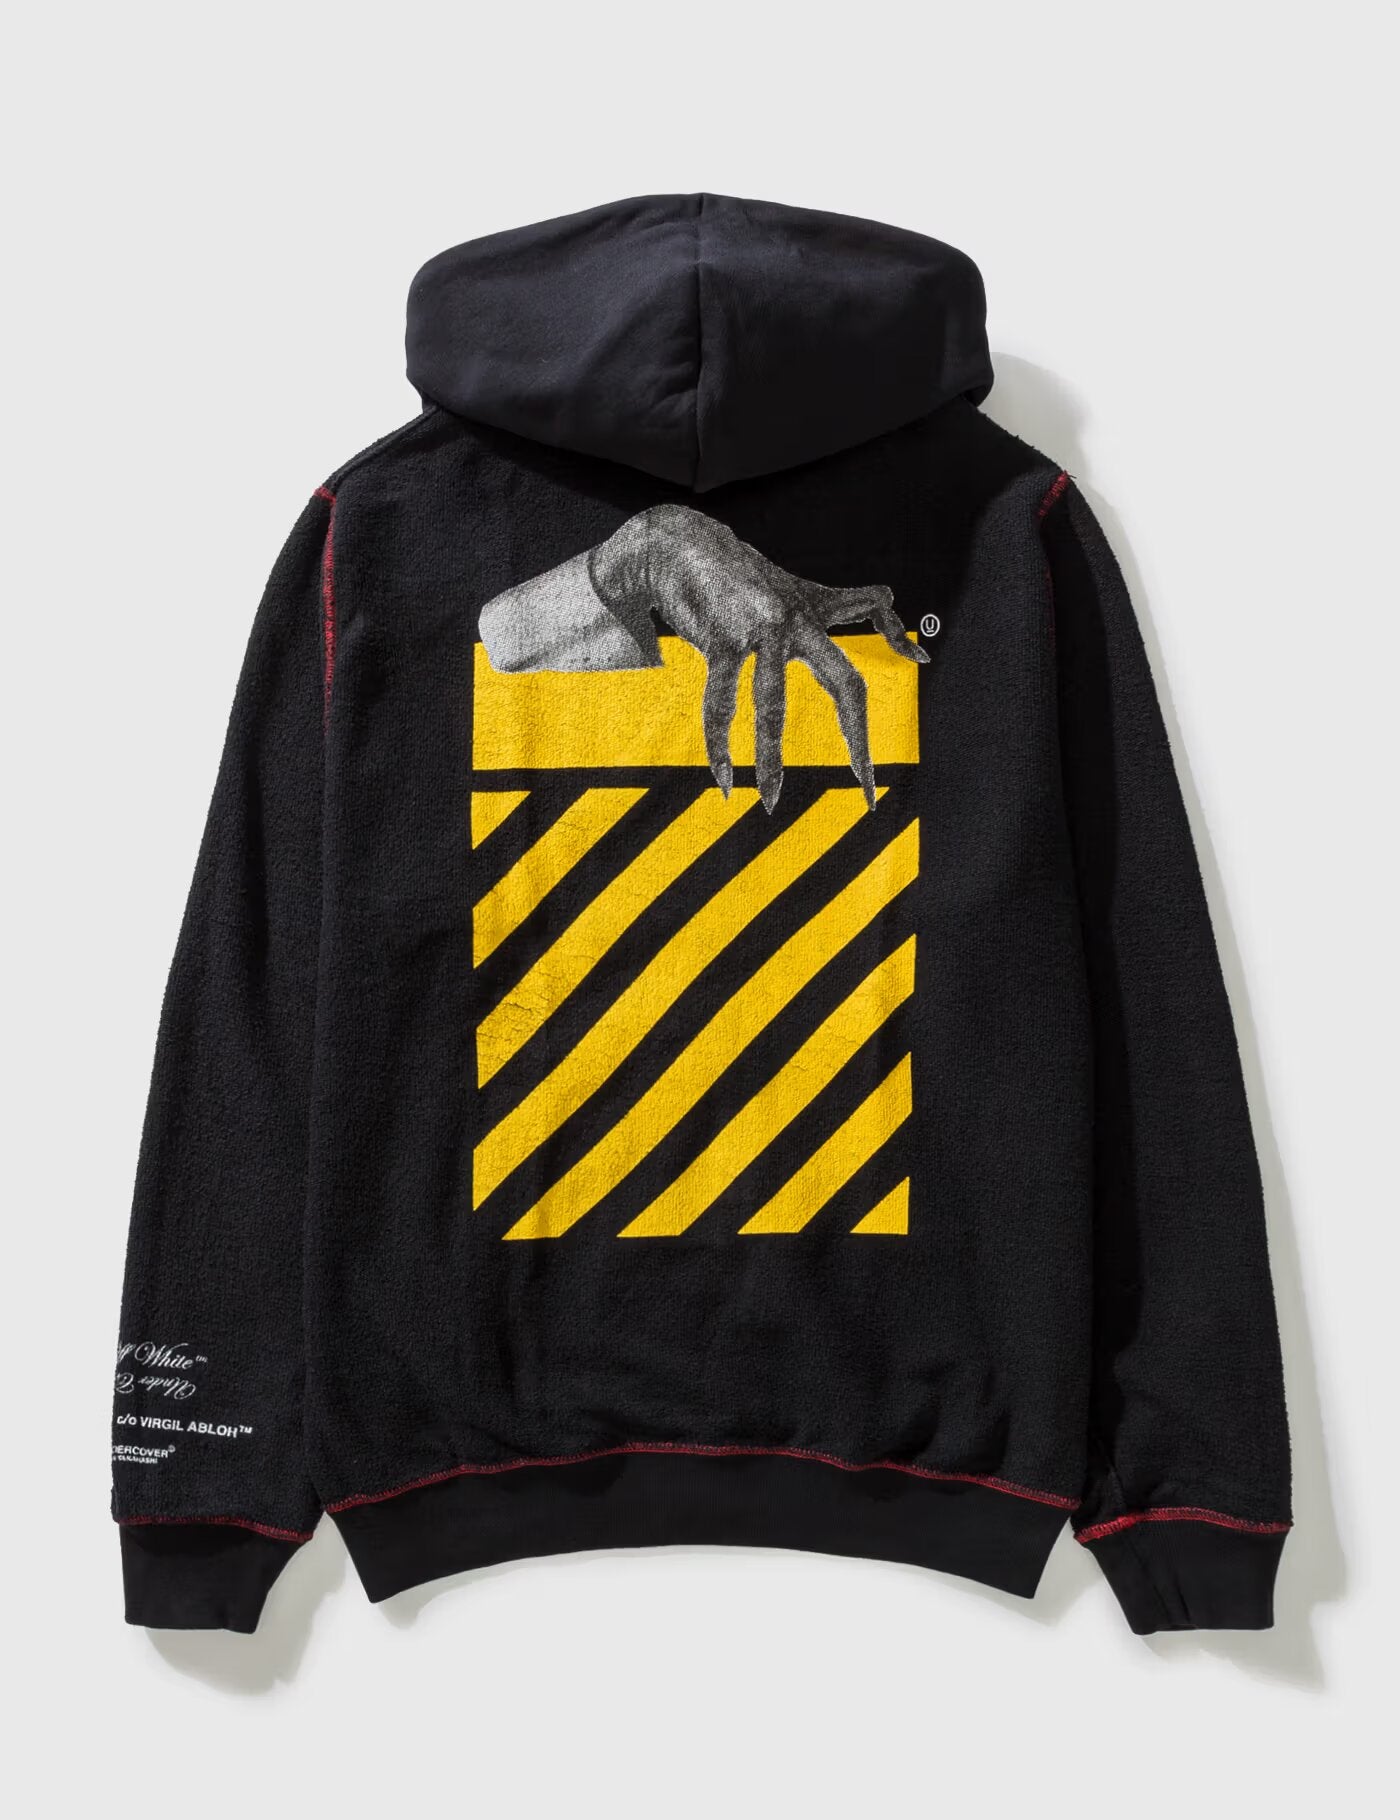 OFF-WHITE X UNDERCOVER REVERSIBLE ZIPUP HOODIE